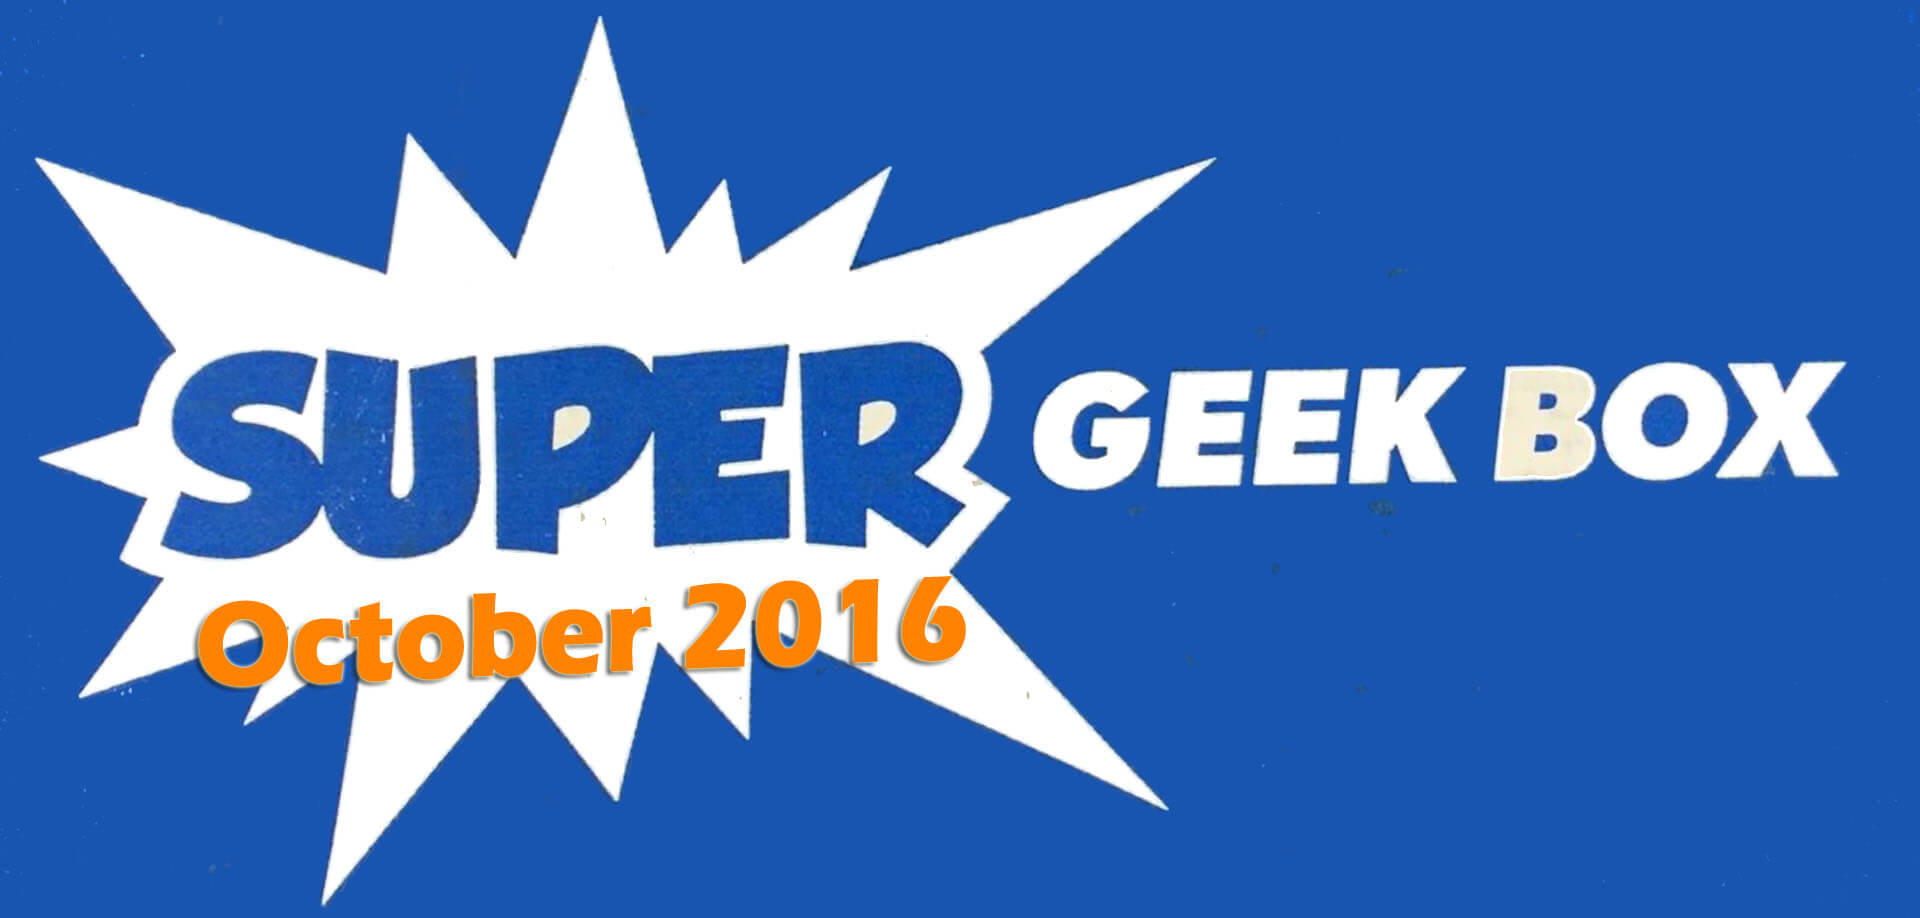 Super Geek Box:  A Cute Kind of Darkness - Review